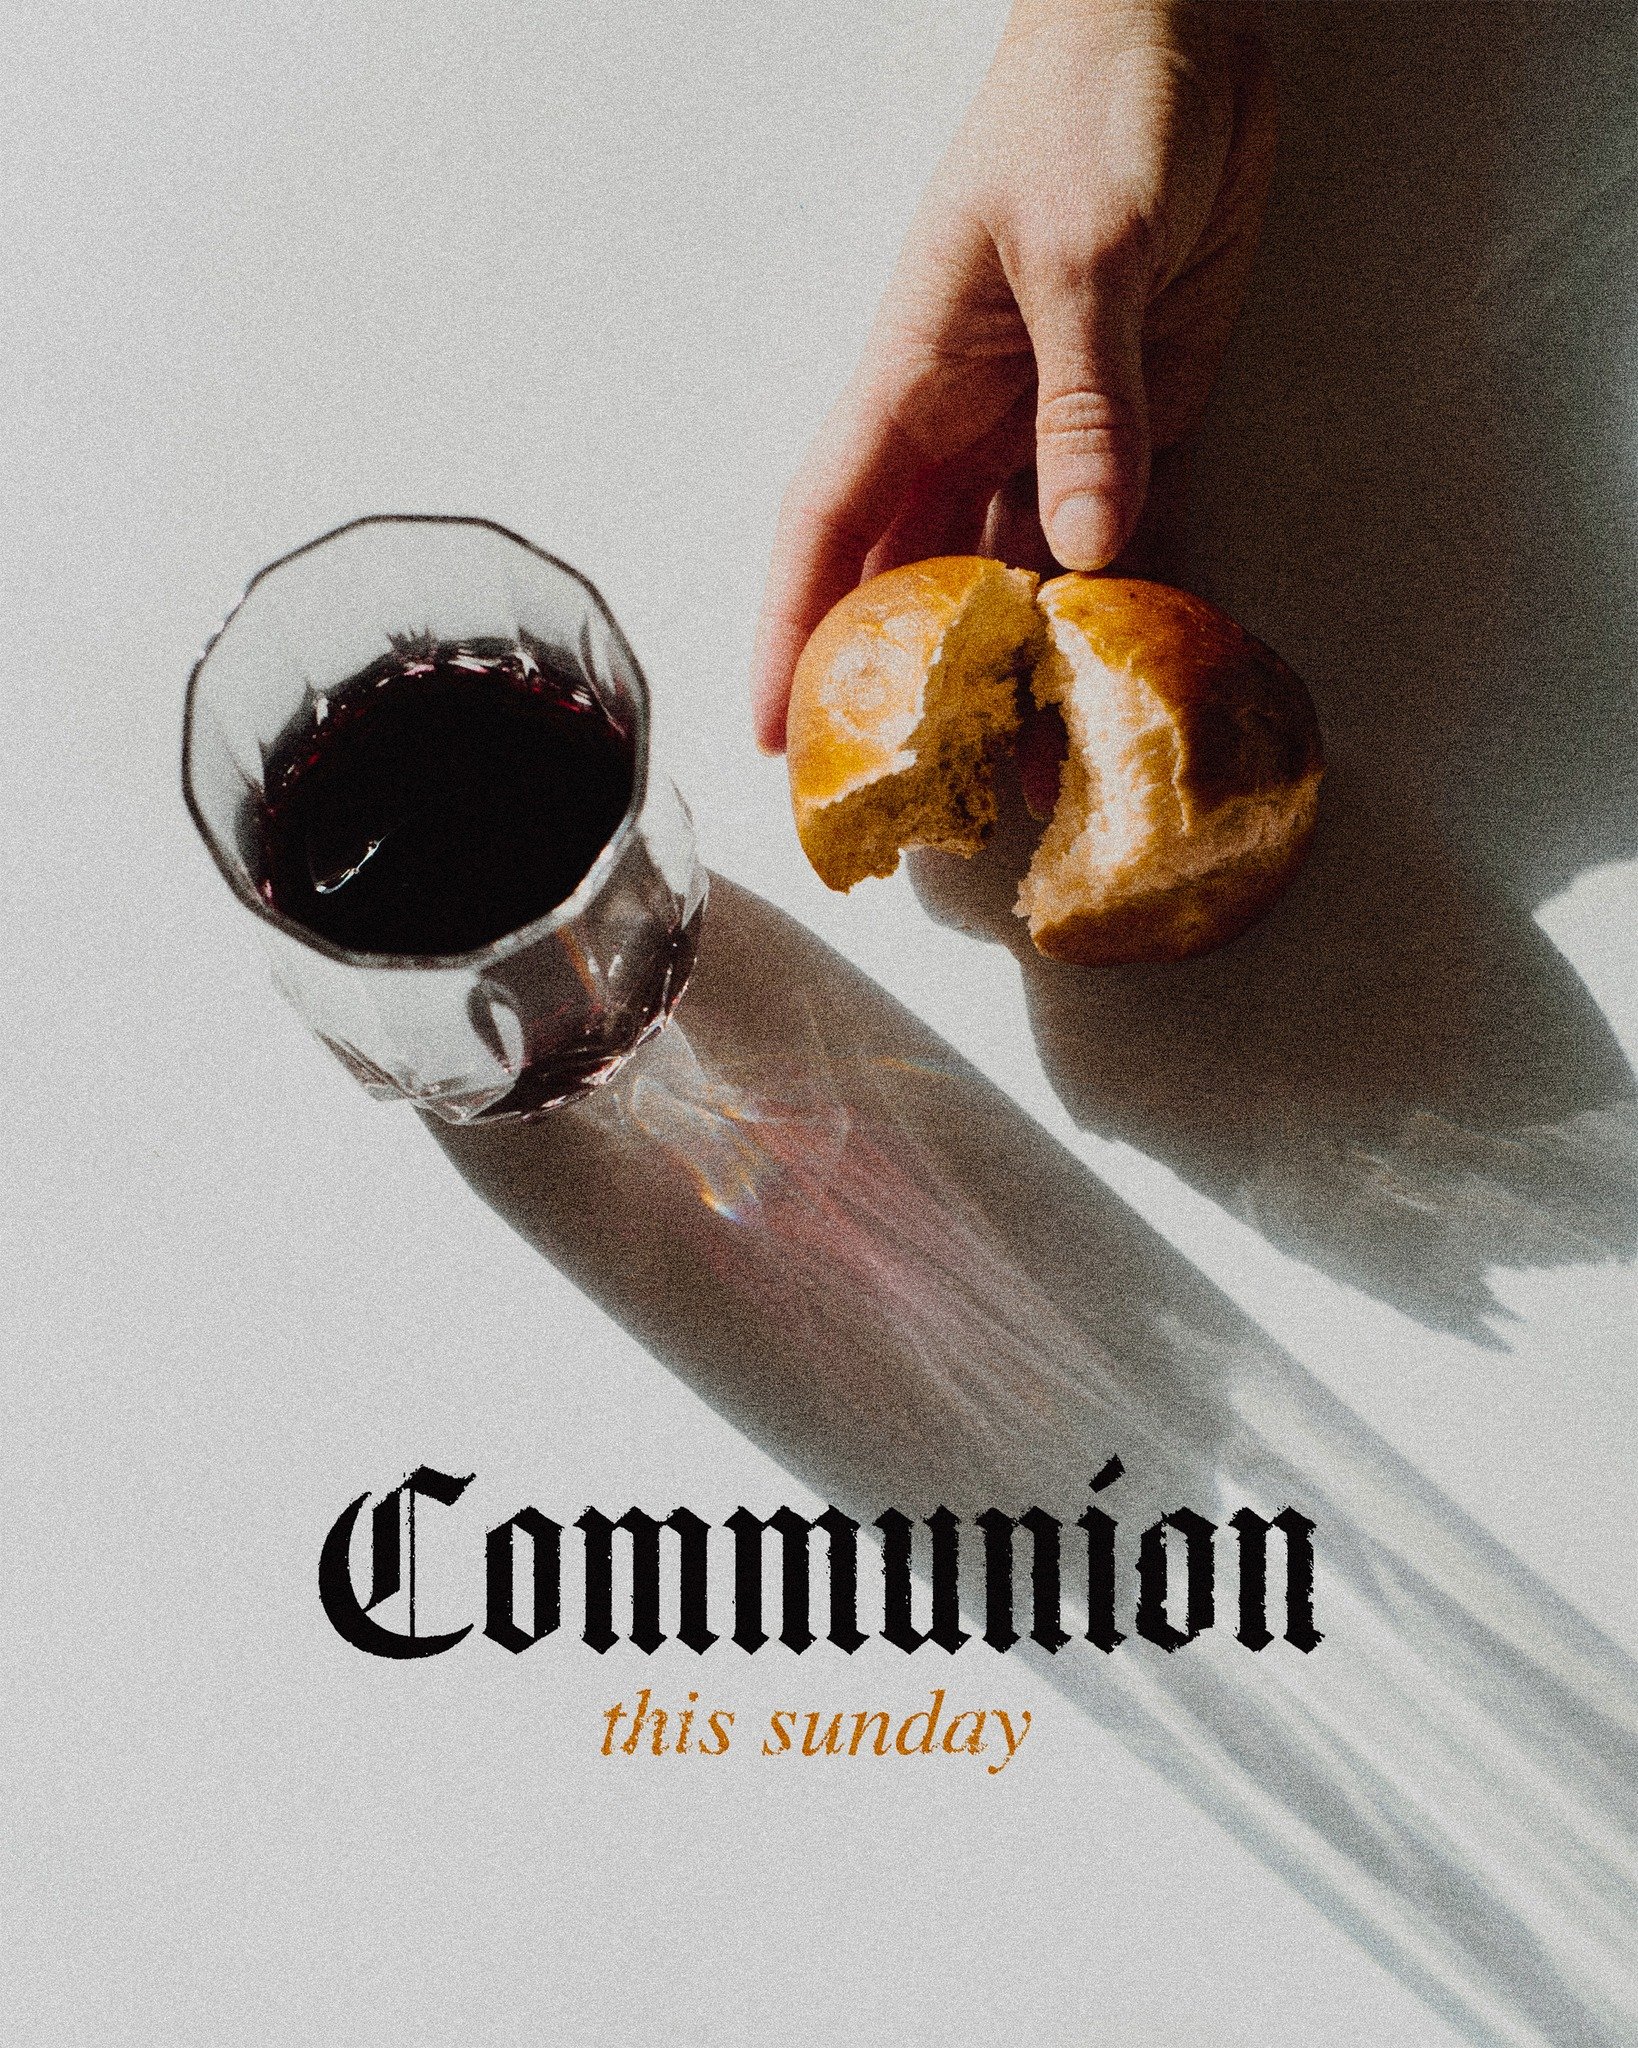 We celebrate communion tomorrow as a church! Join us at 9:15 or 11:00am in person or join us in your home as you watch online.